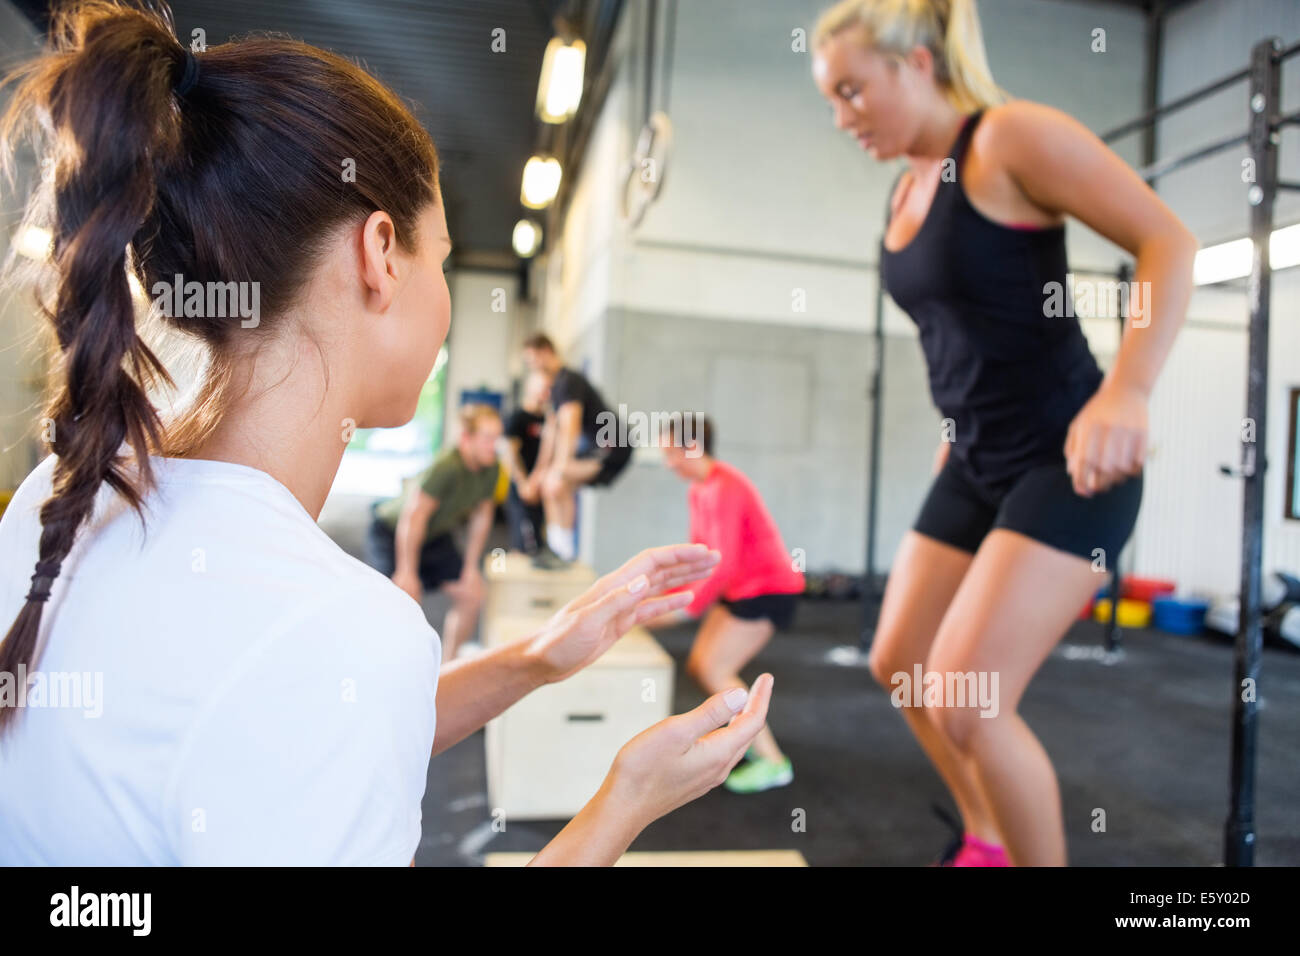 Instructor Encouraging Athlete In Box Jumping Stock Photo